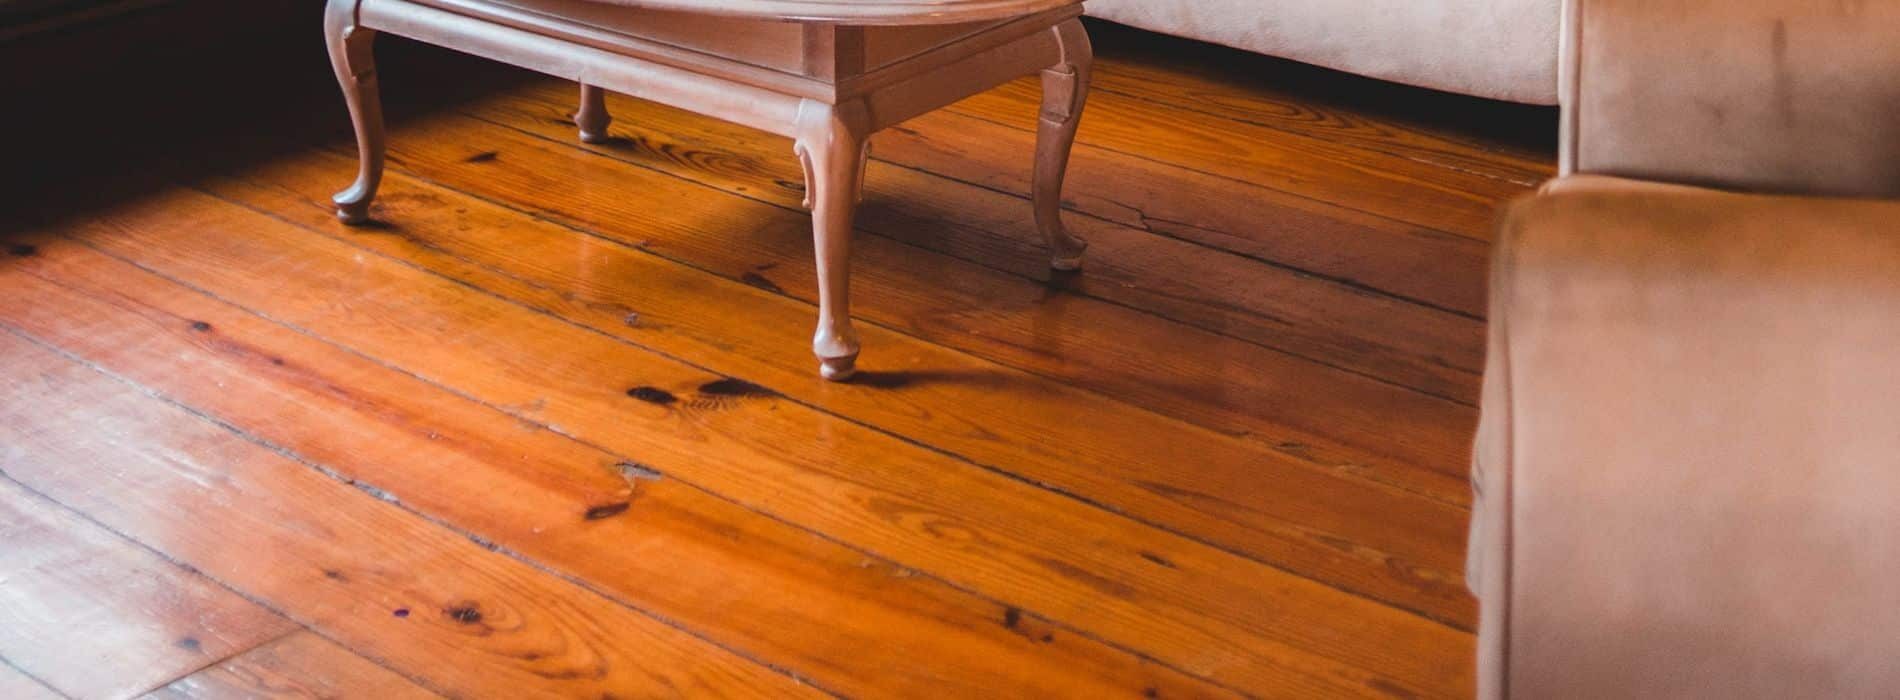 A wooden table sitting on top of a hard wood floor. 